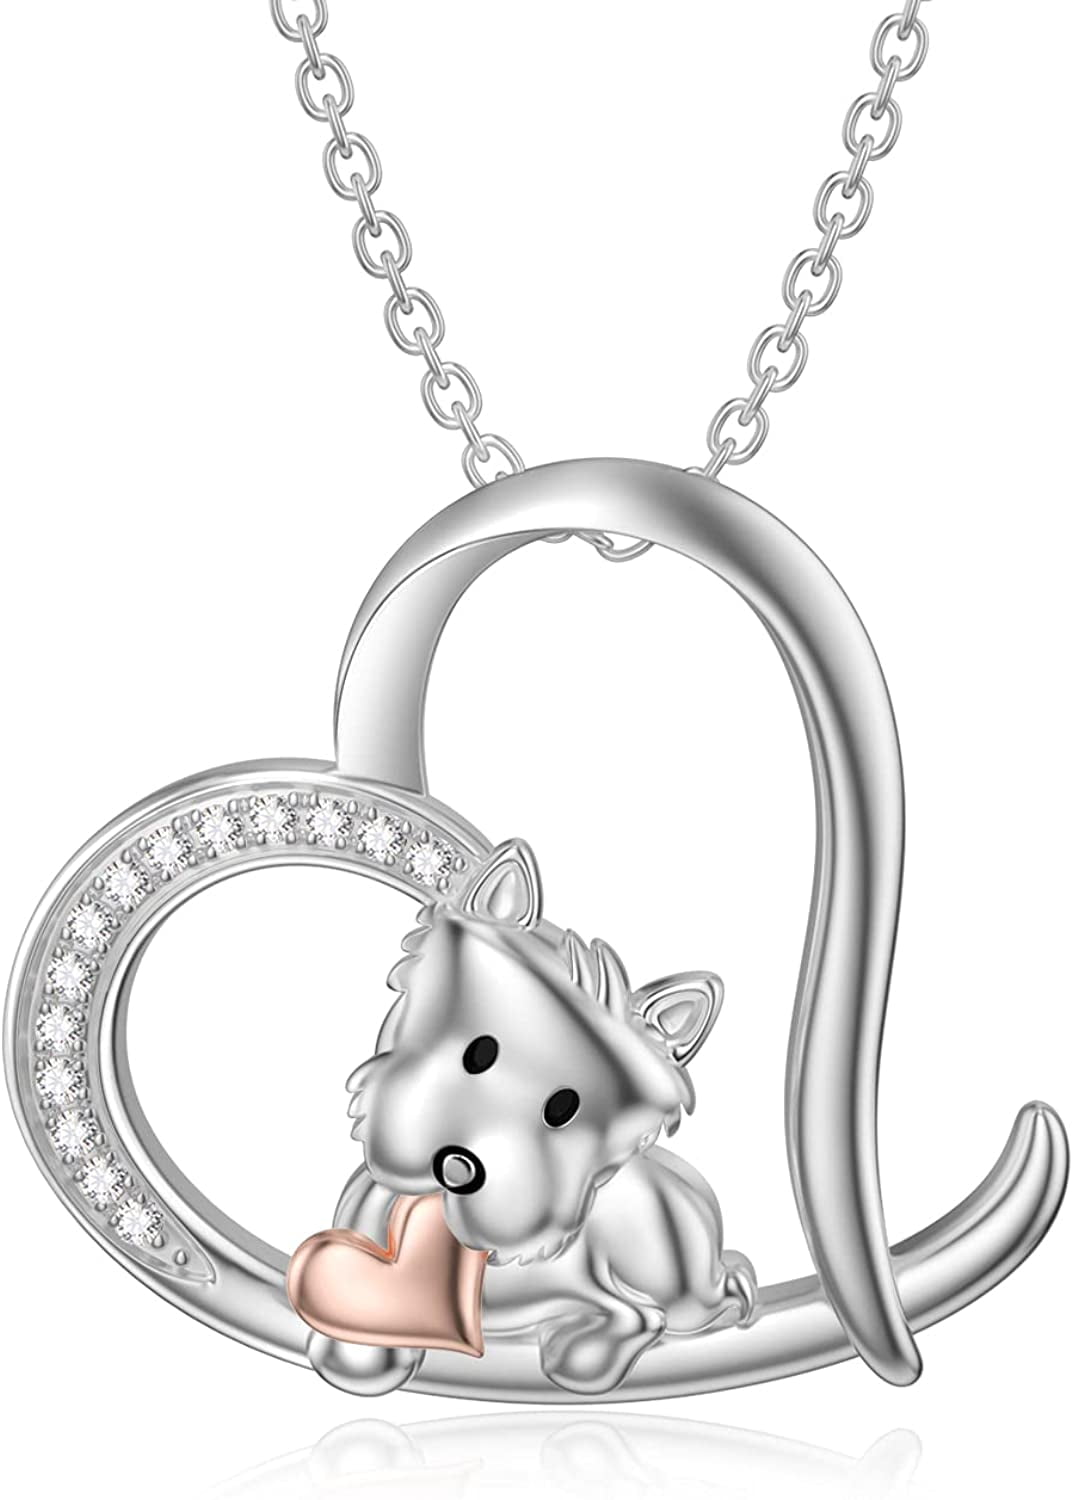 Papillon necklace sterling silver dog breeds pendant w/Heart - Love Pet  Jewelry Italian chain Women Best Cute Gift Personalized Toy Spaniel